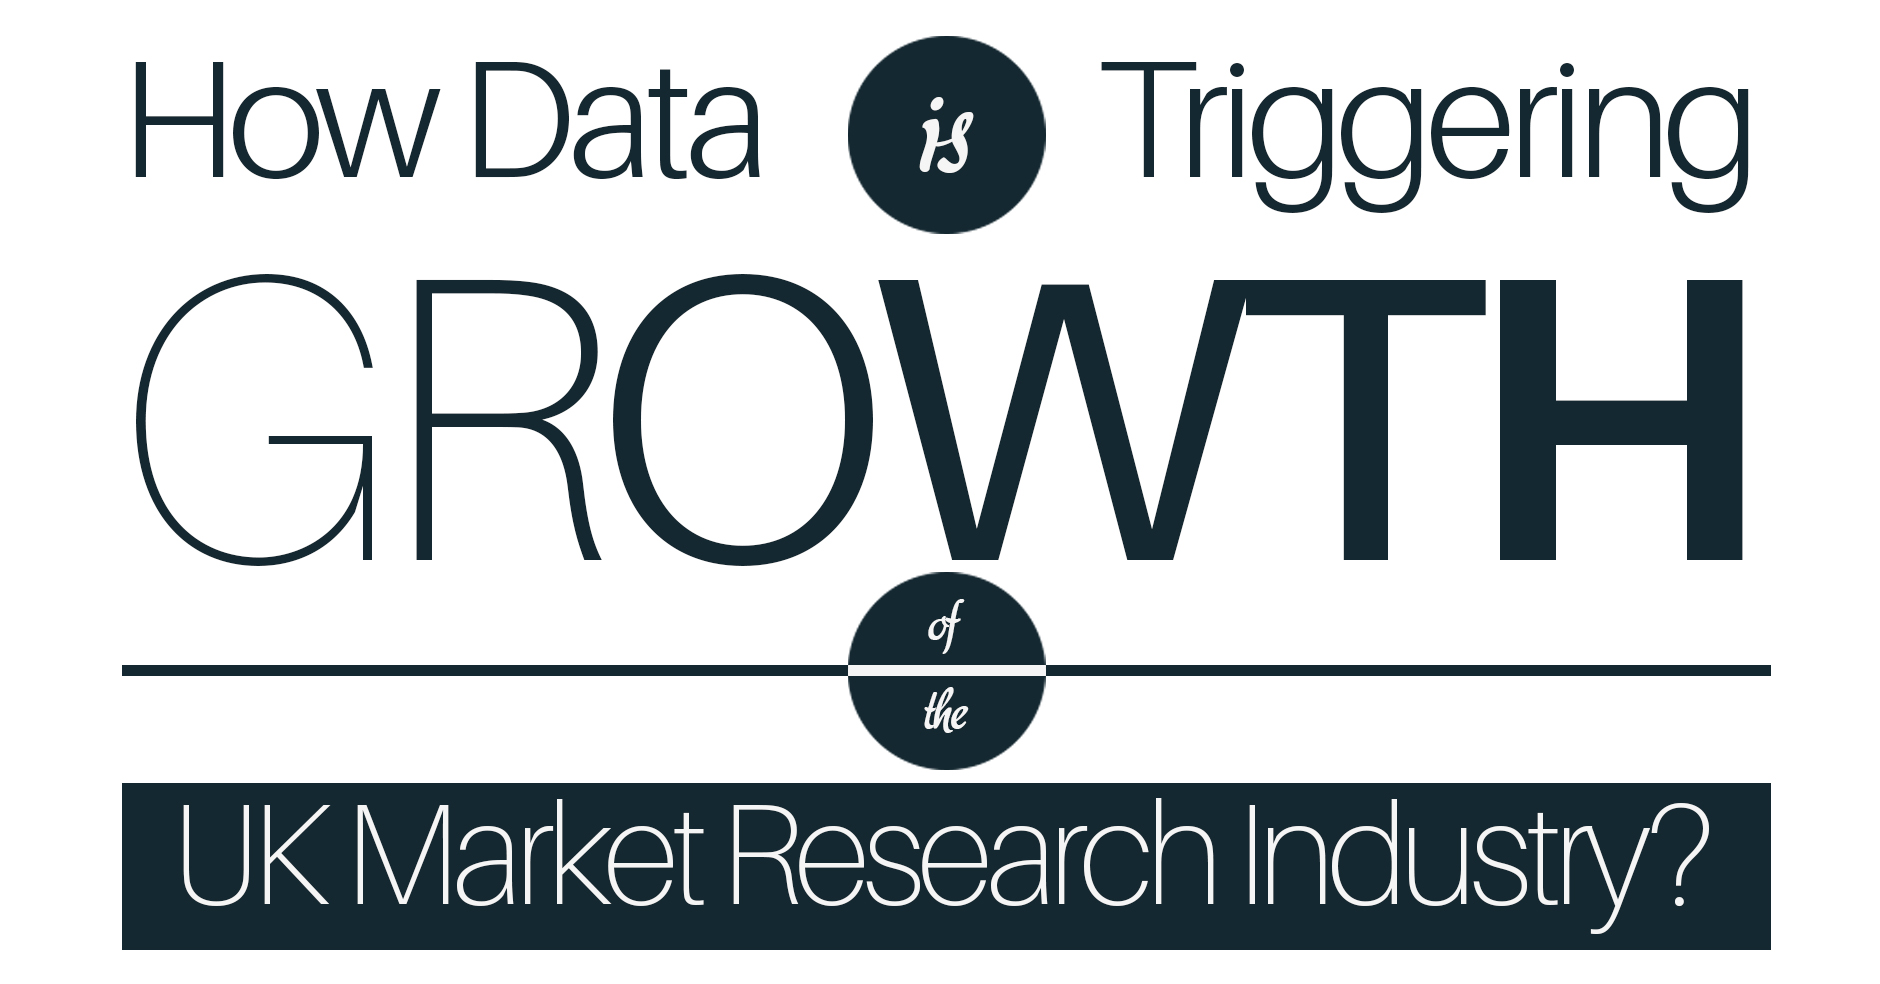 how data is triggering the growth of the uk research market industry thumbnail image